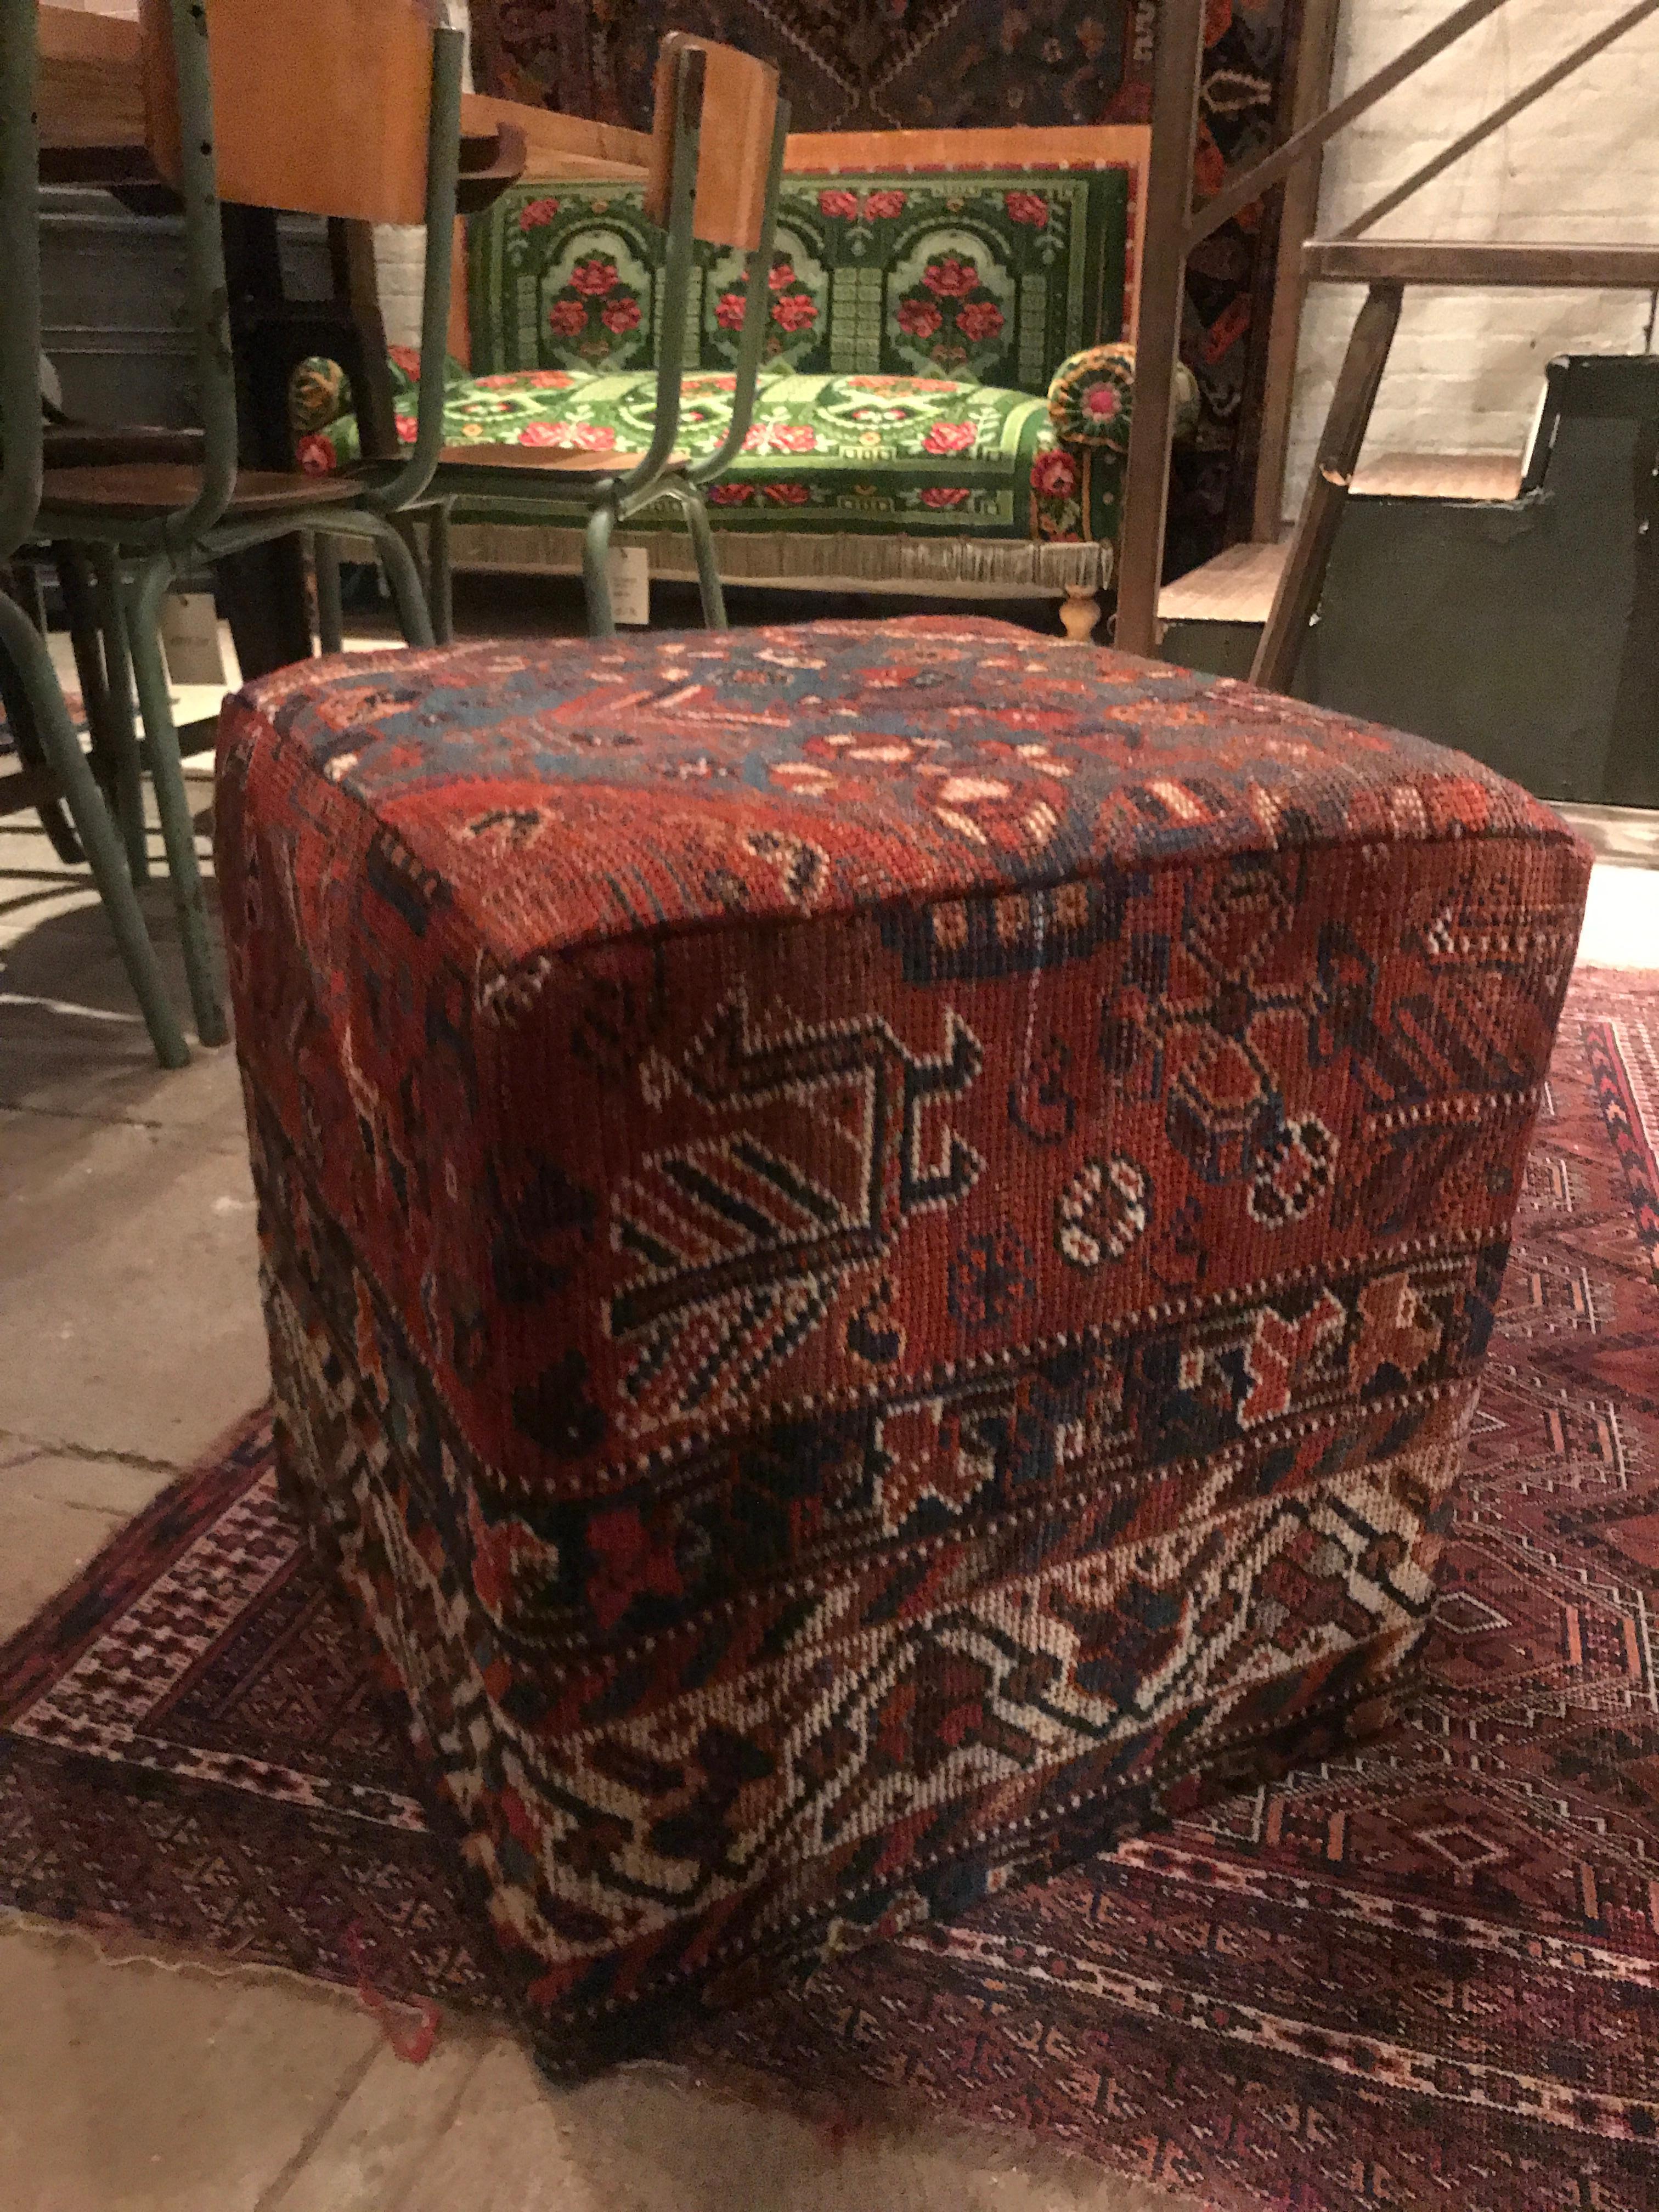 Rich colored vintage ottoman created with deconstructed vintage Turkmen rugs. Rigged wool covering perfect for a livable space.